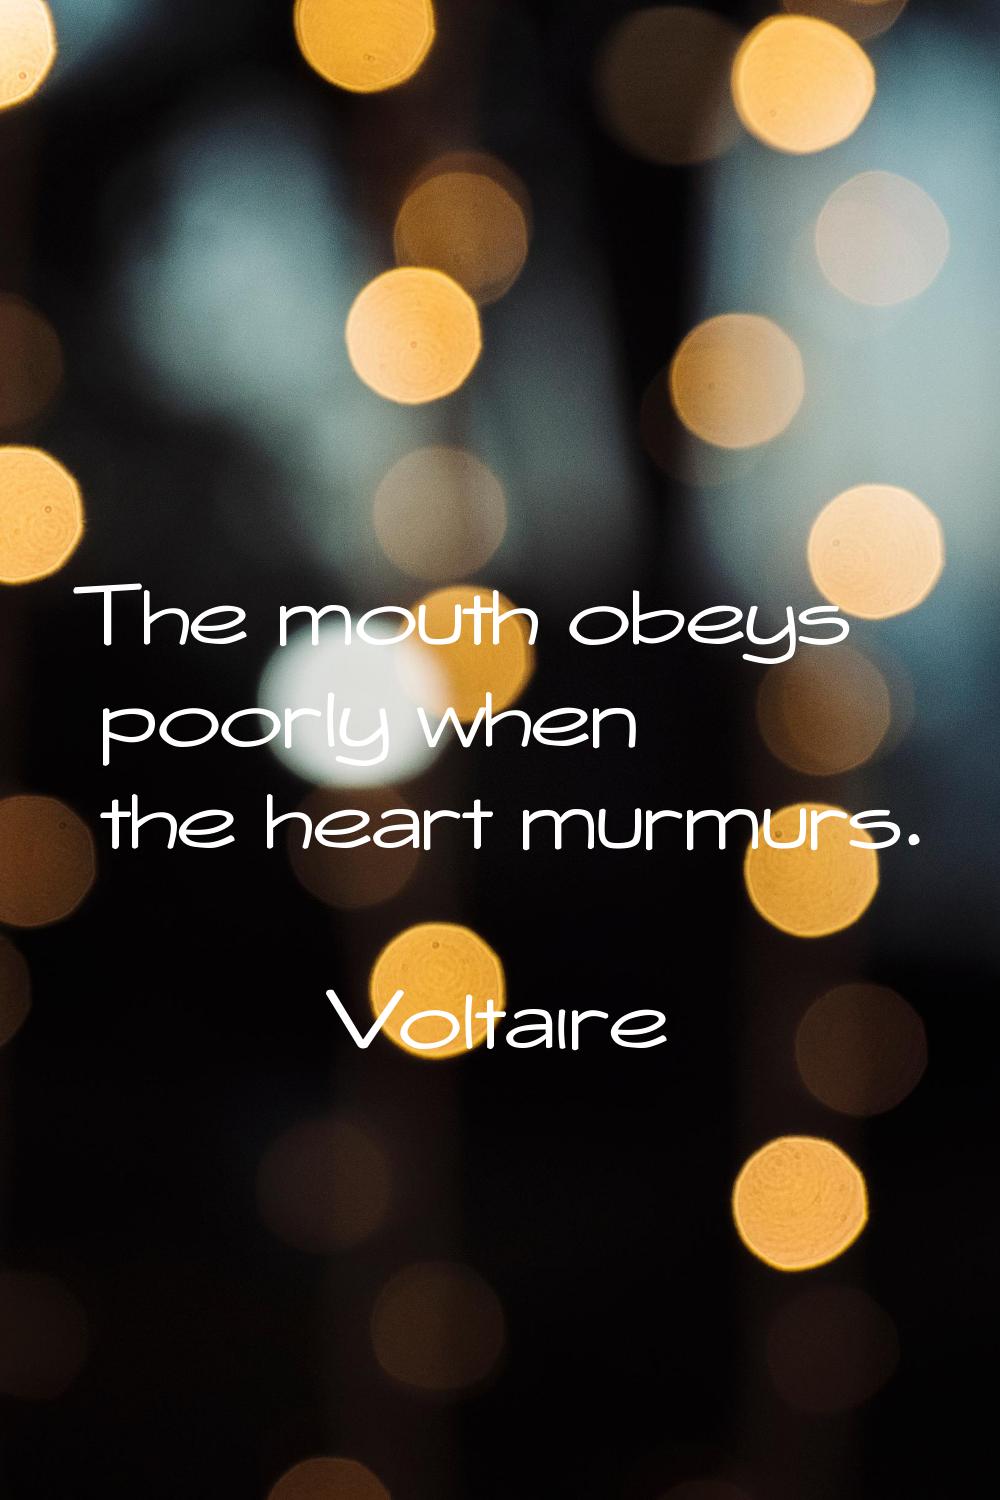 The mouth obeys poorly when the heart murmurs.